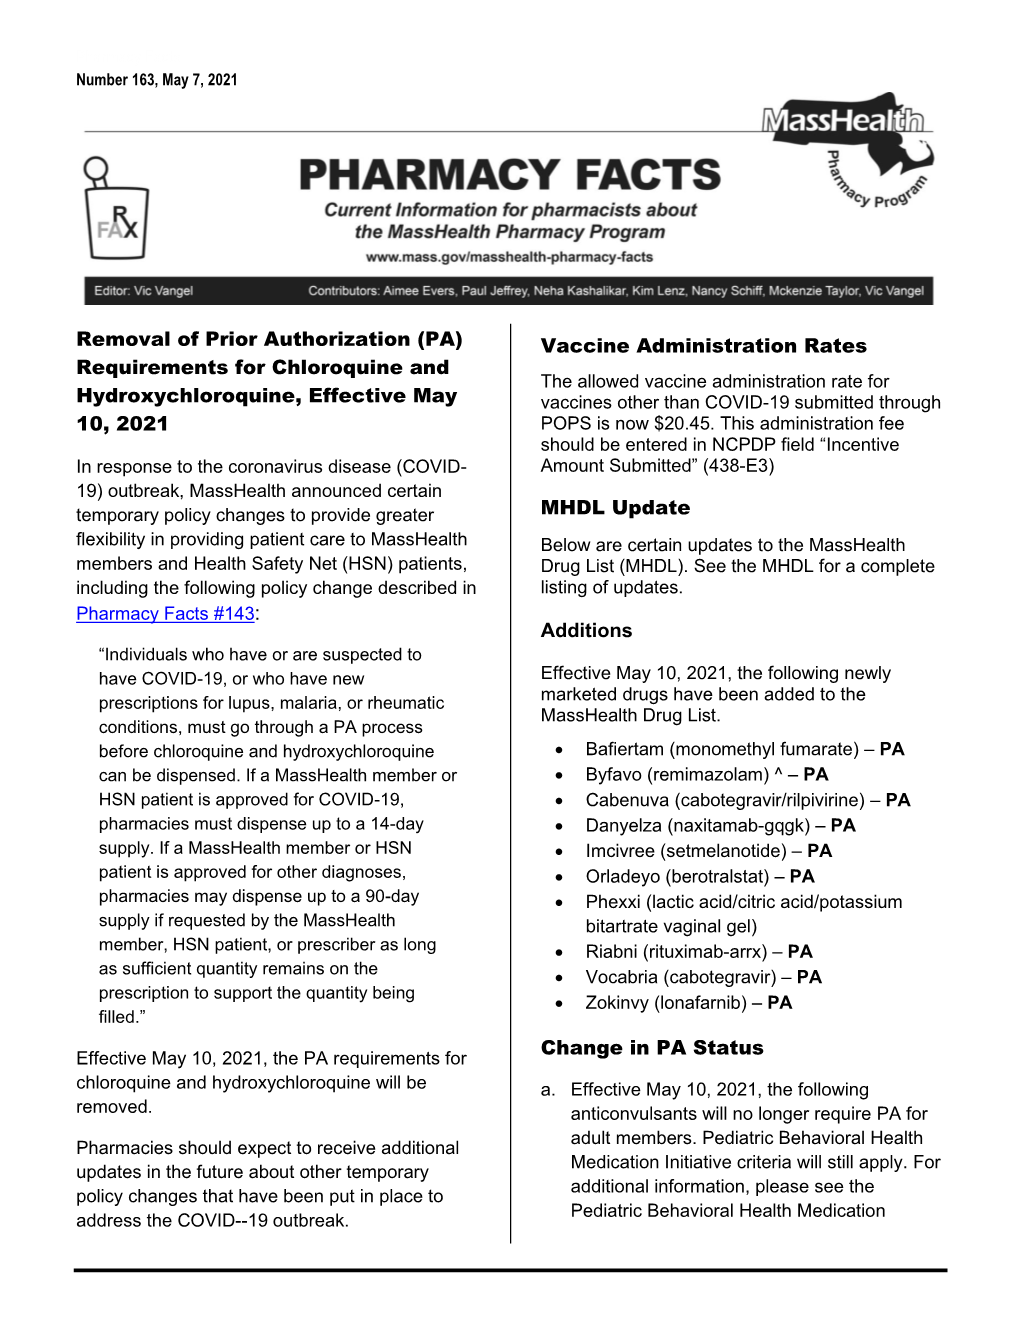 Removal of Prior Authorization (PA) Requirements for Chloroquine And